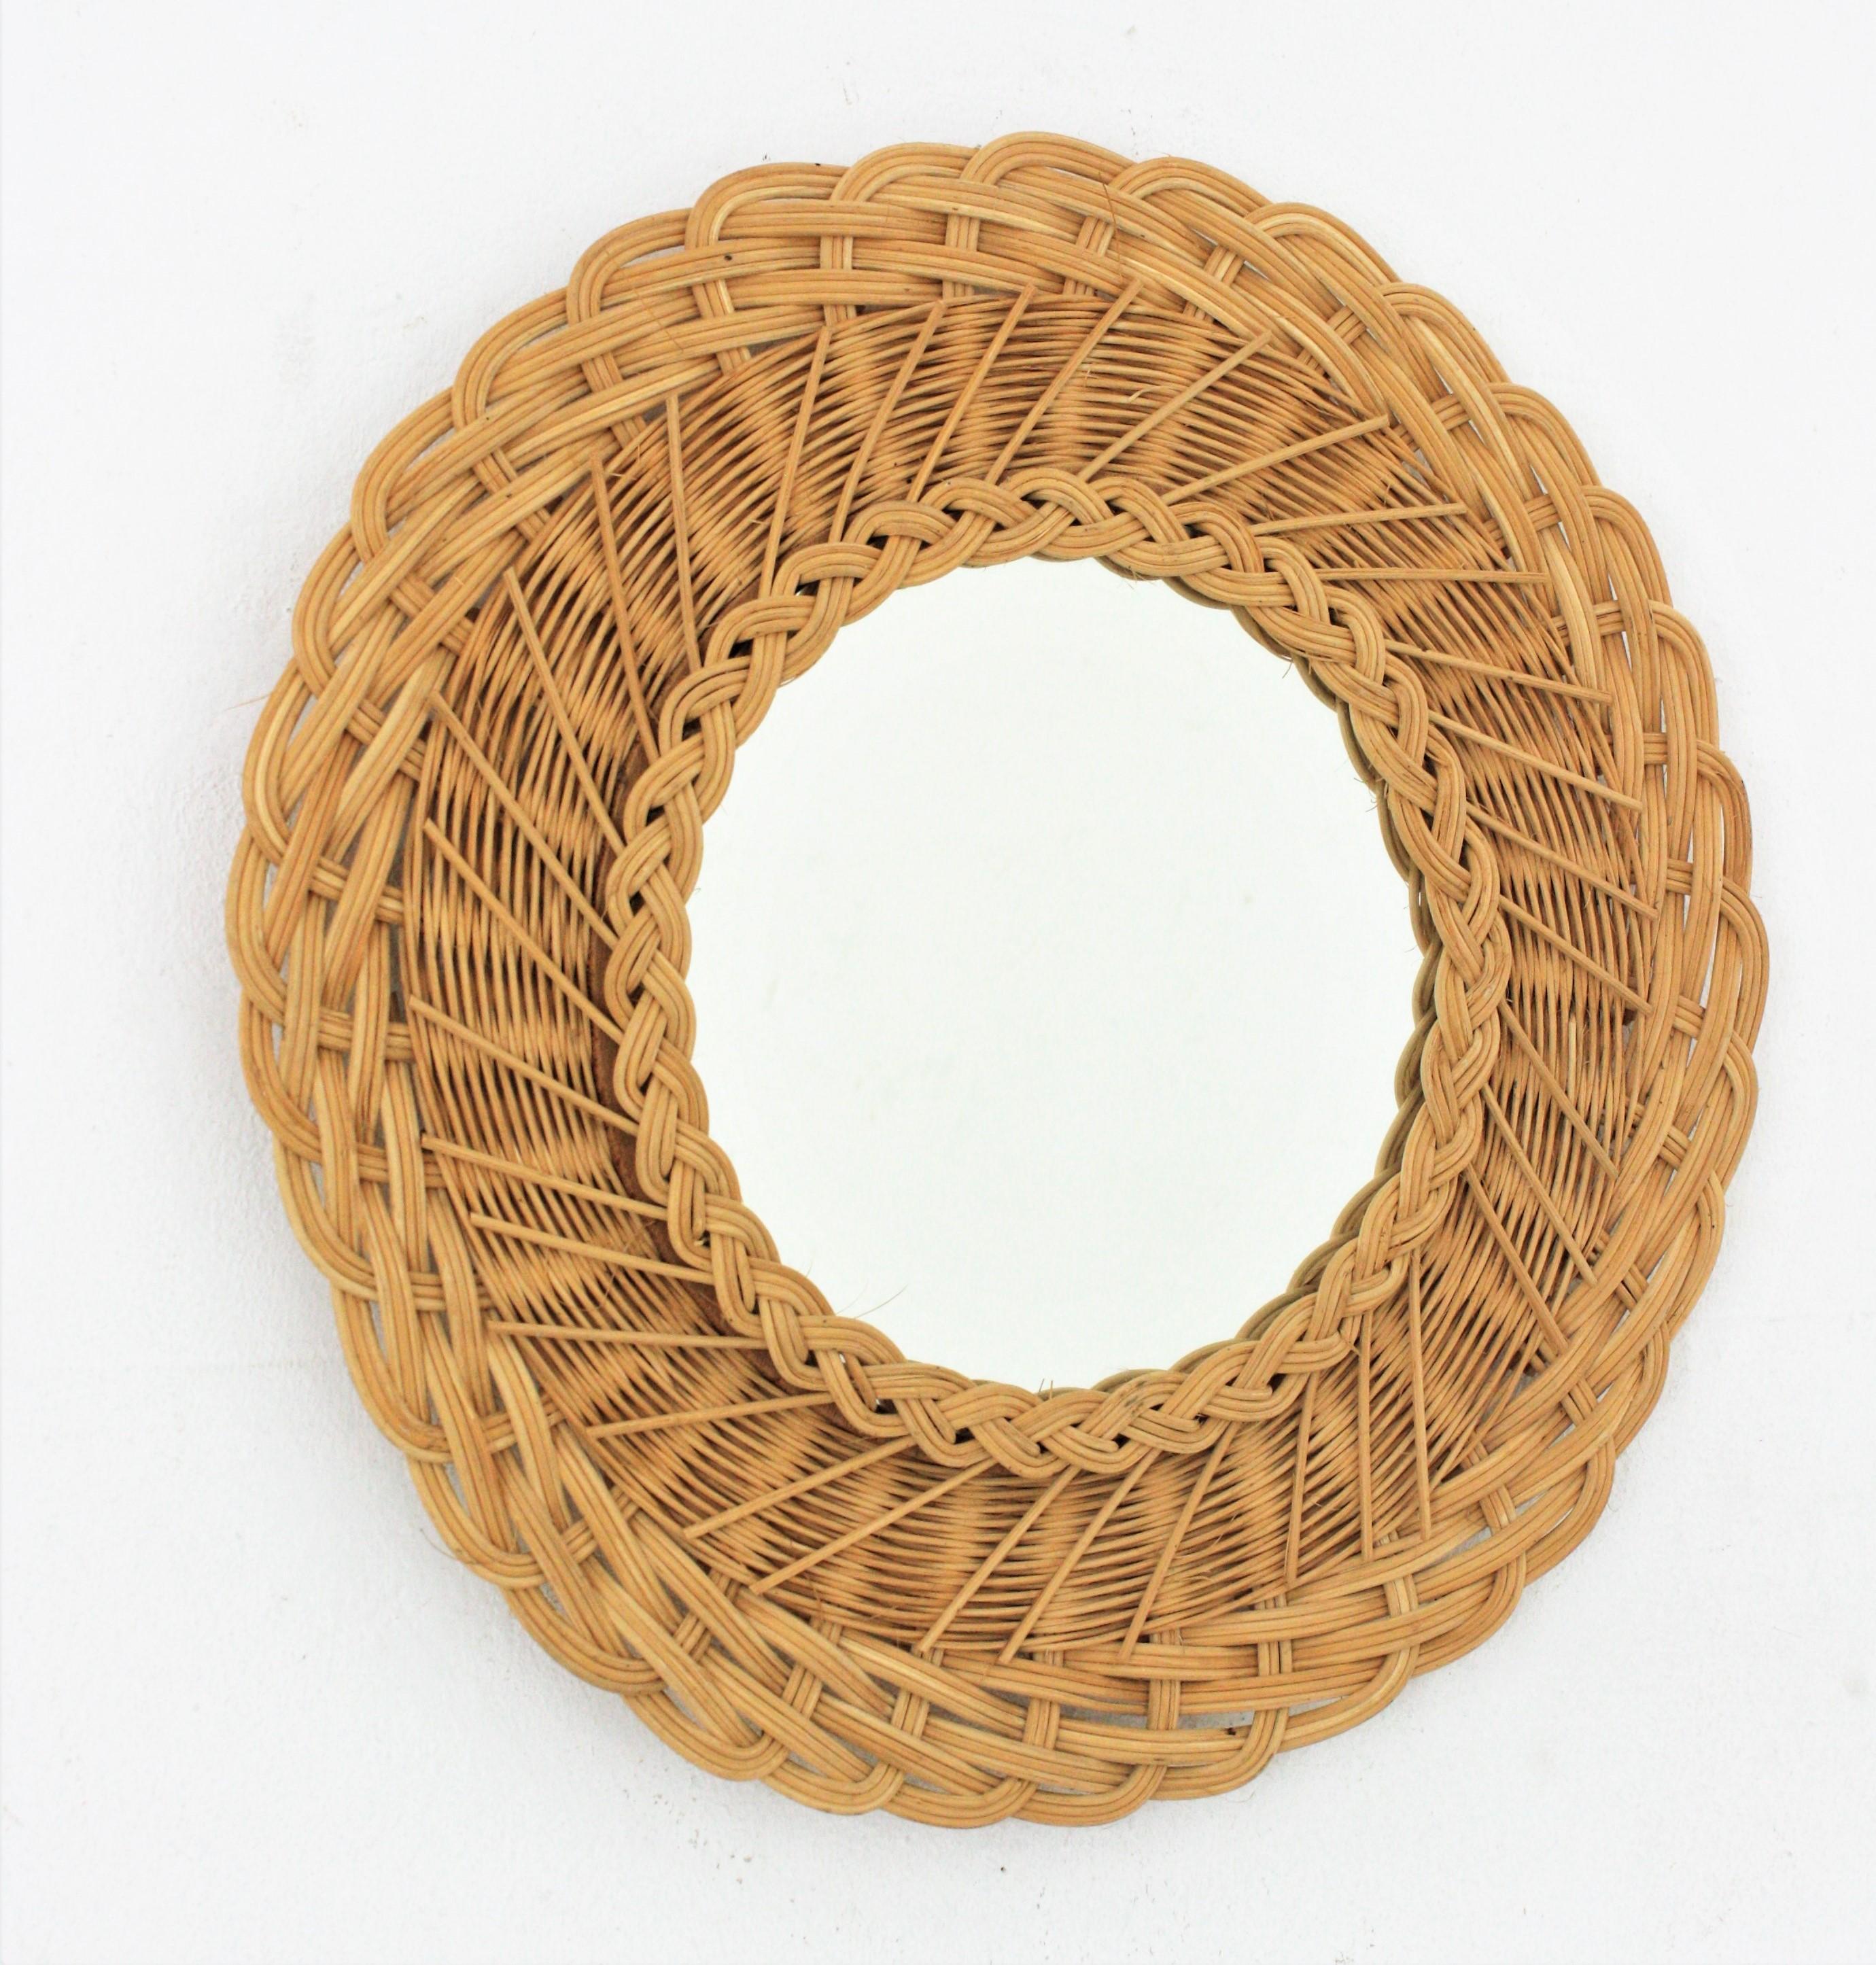 Eye-catchign round mirror handcrafted with woven wicker. Bohemian style, France, 1960s
Manufactured at the Mid-Century Modern period.
This mirror has a handcrafted braided work at the frame that makes it highly decorative and it has all the taste